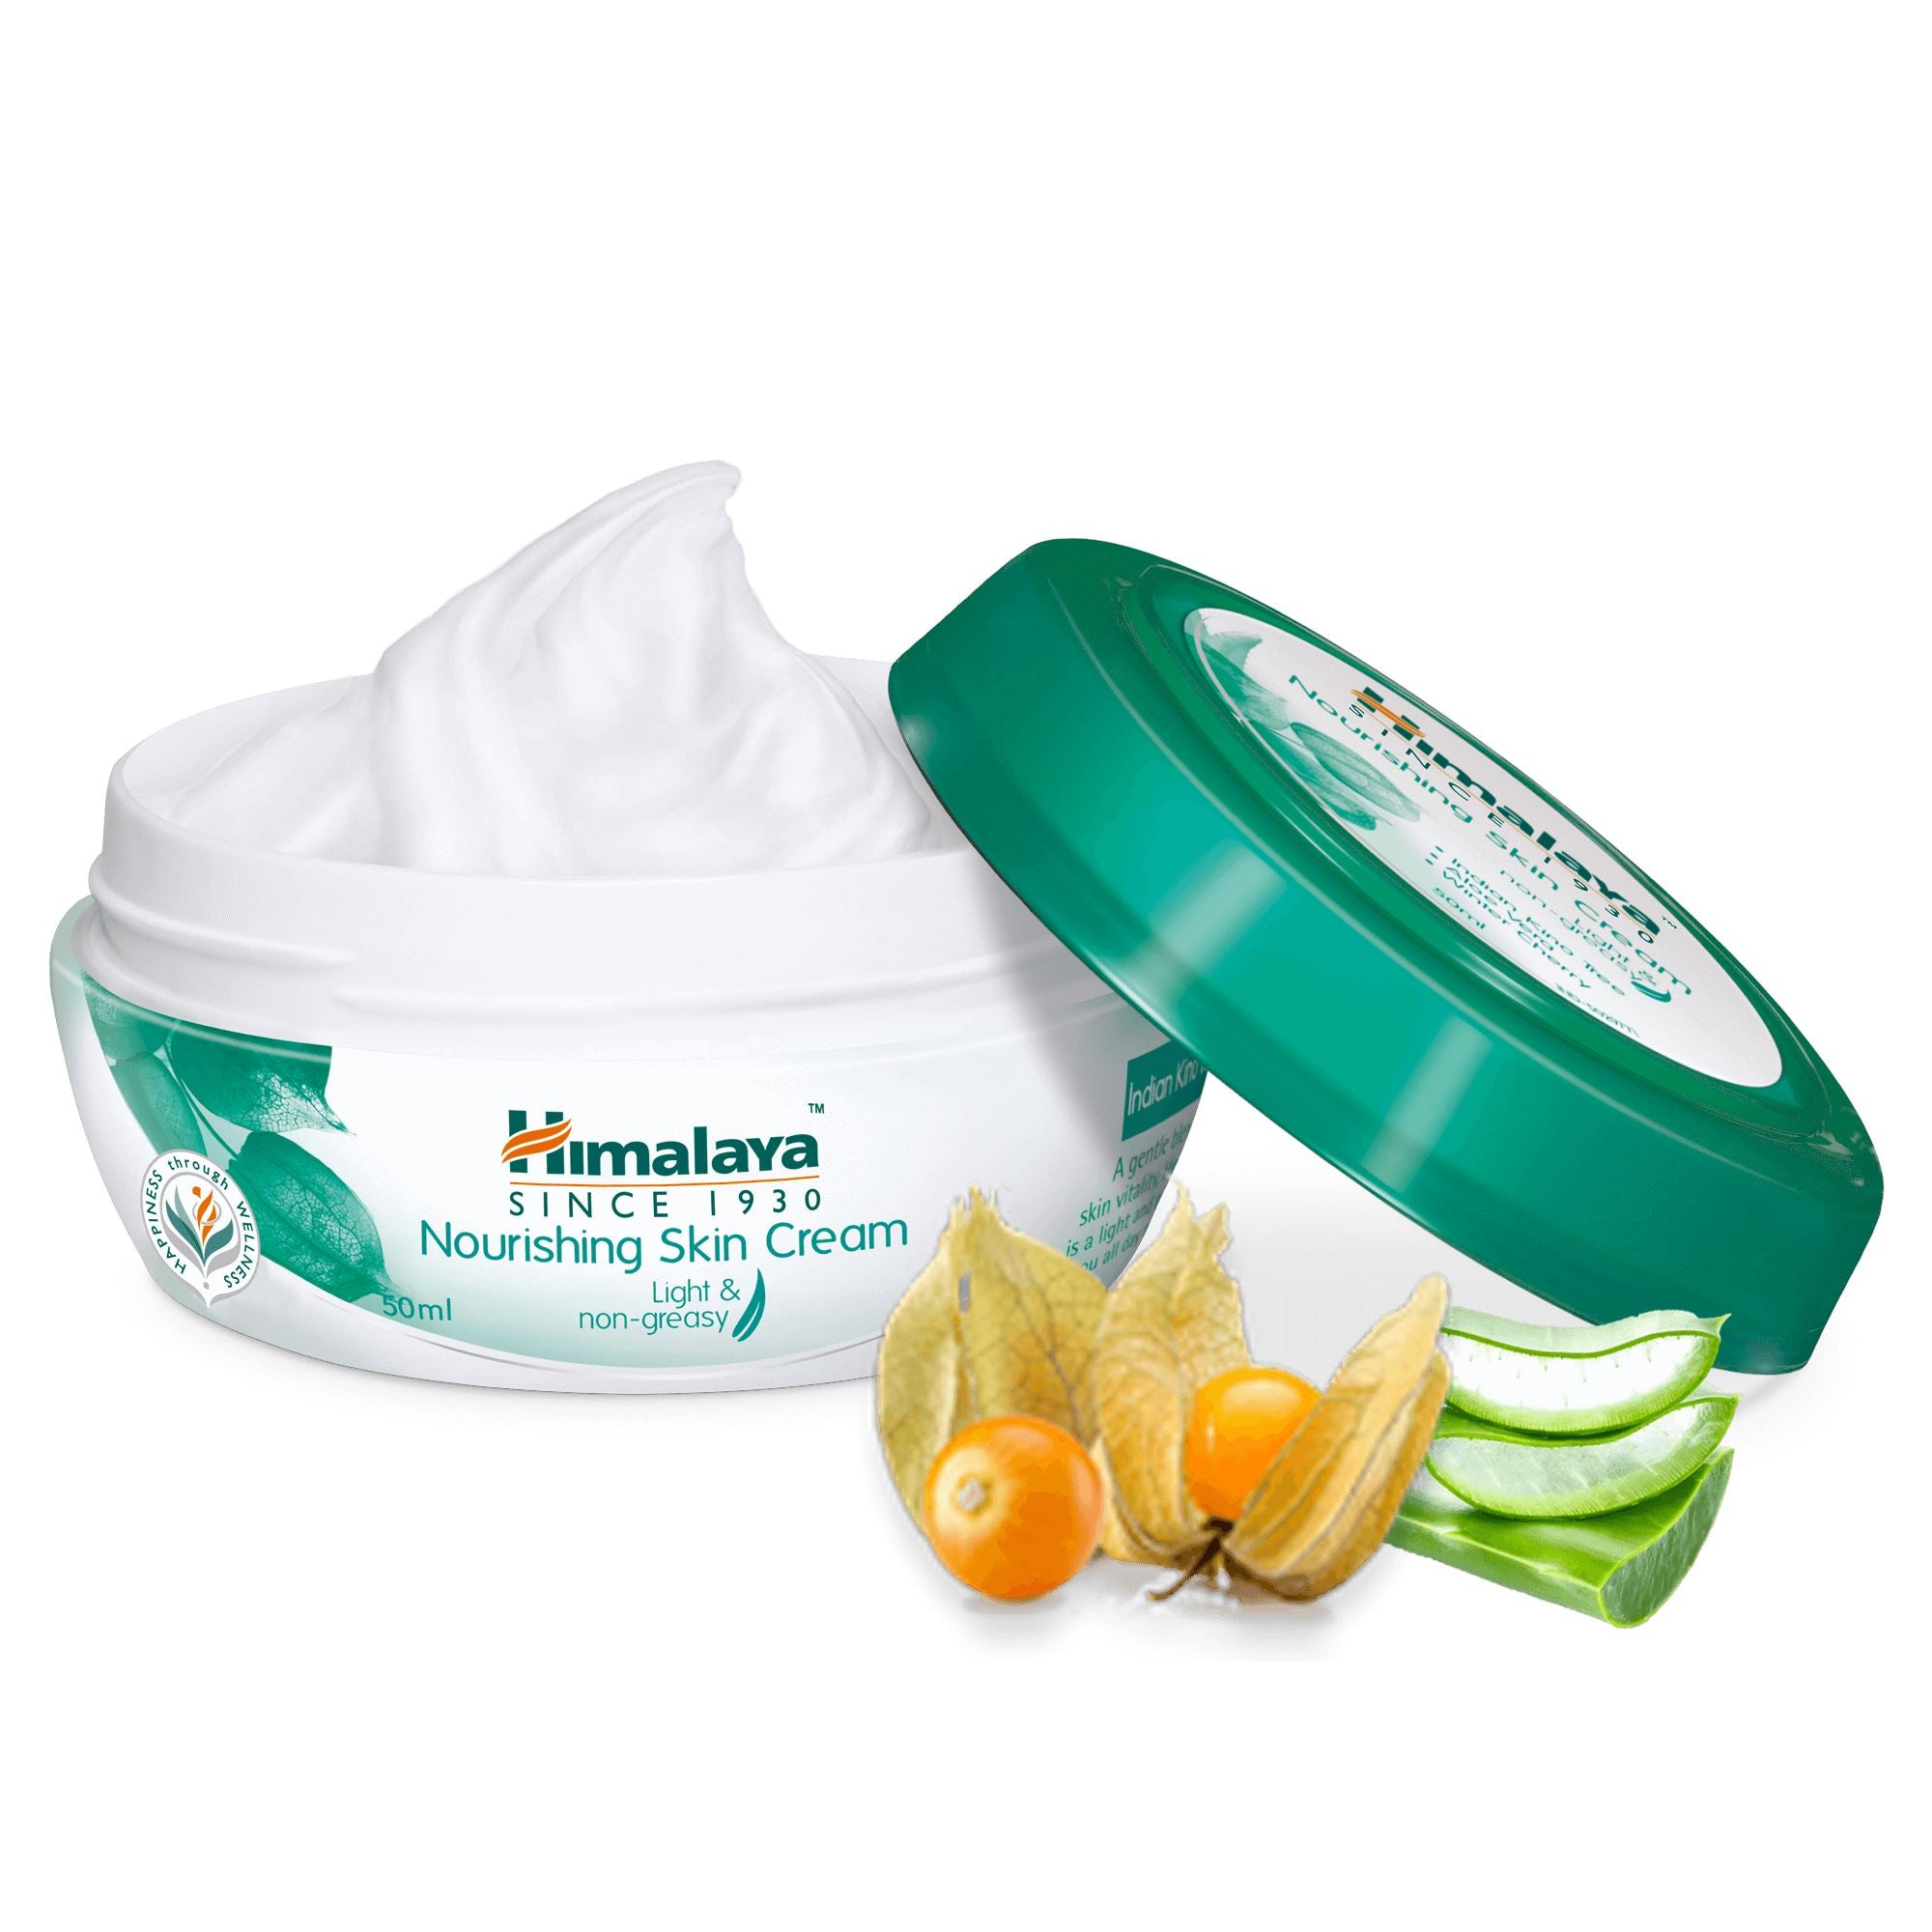 Himalaya Nourishing Skin Cream - Provides all-day nourishment and protection against dryness